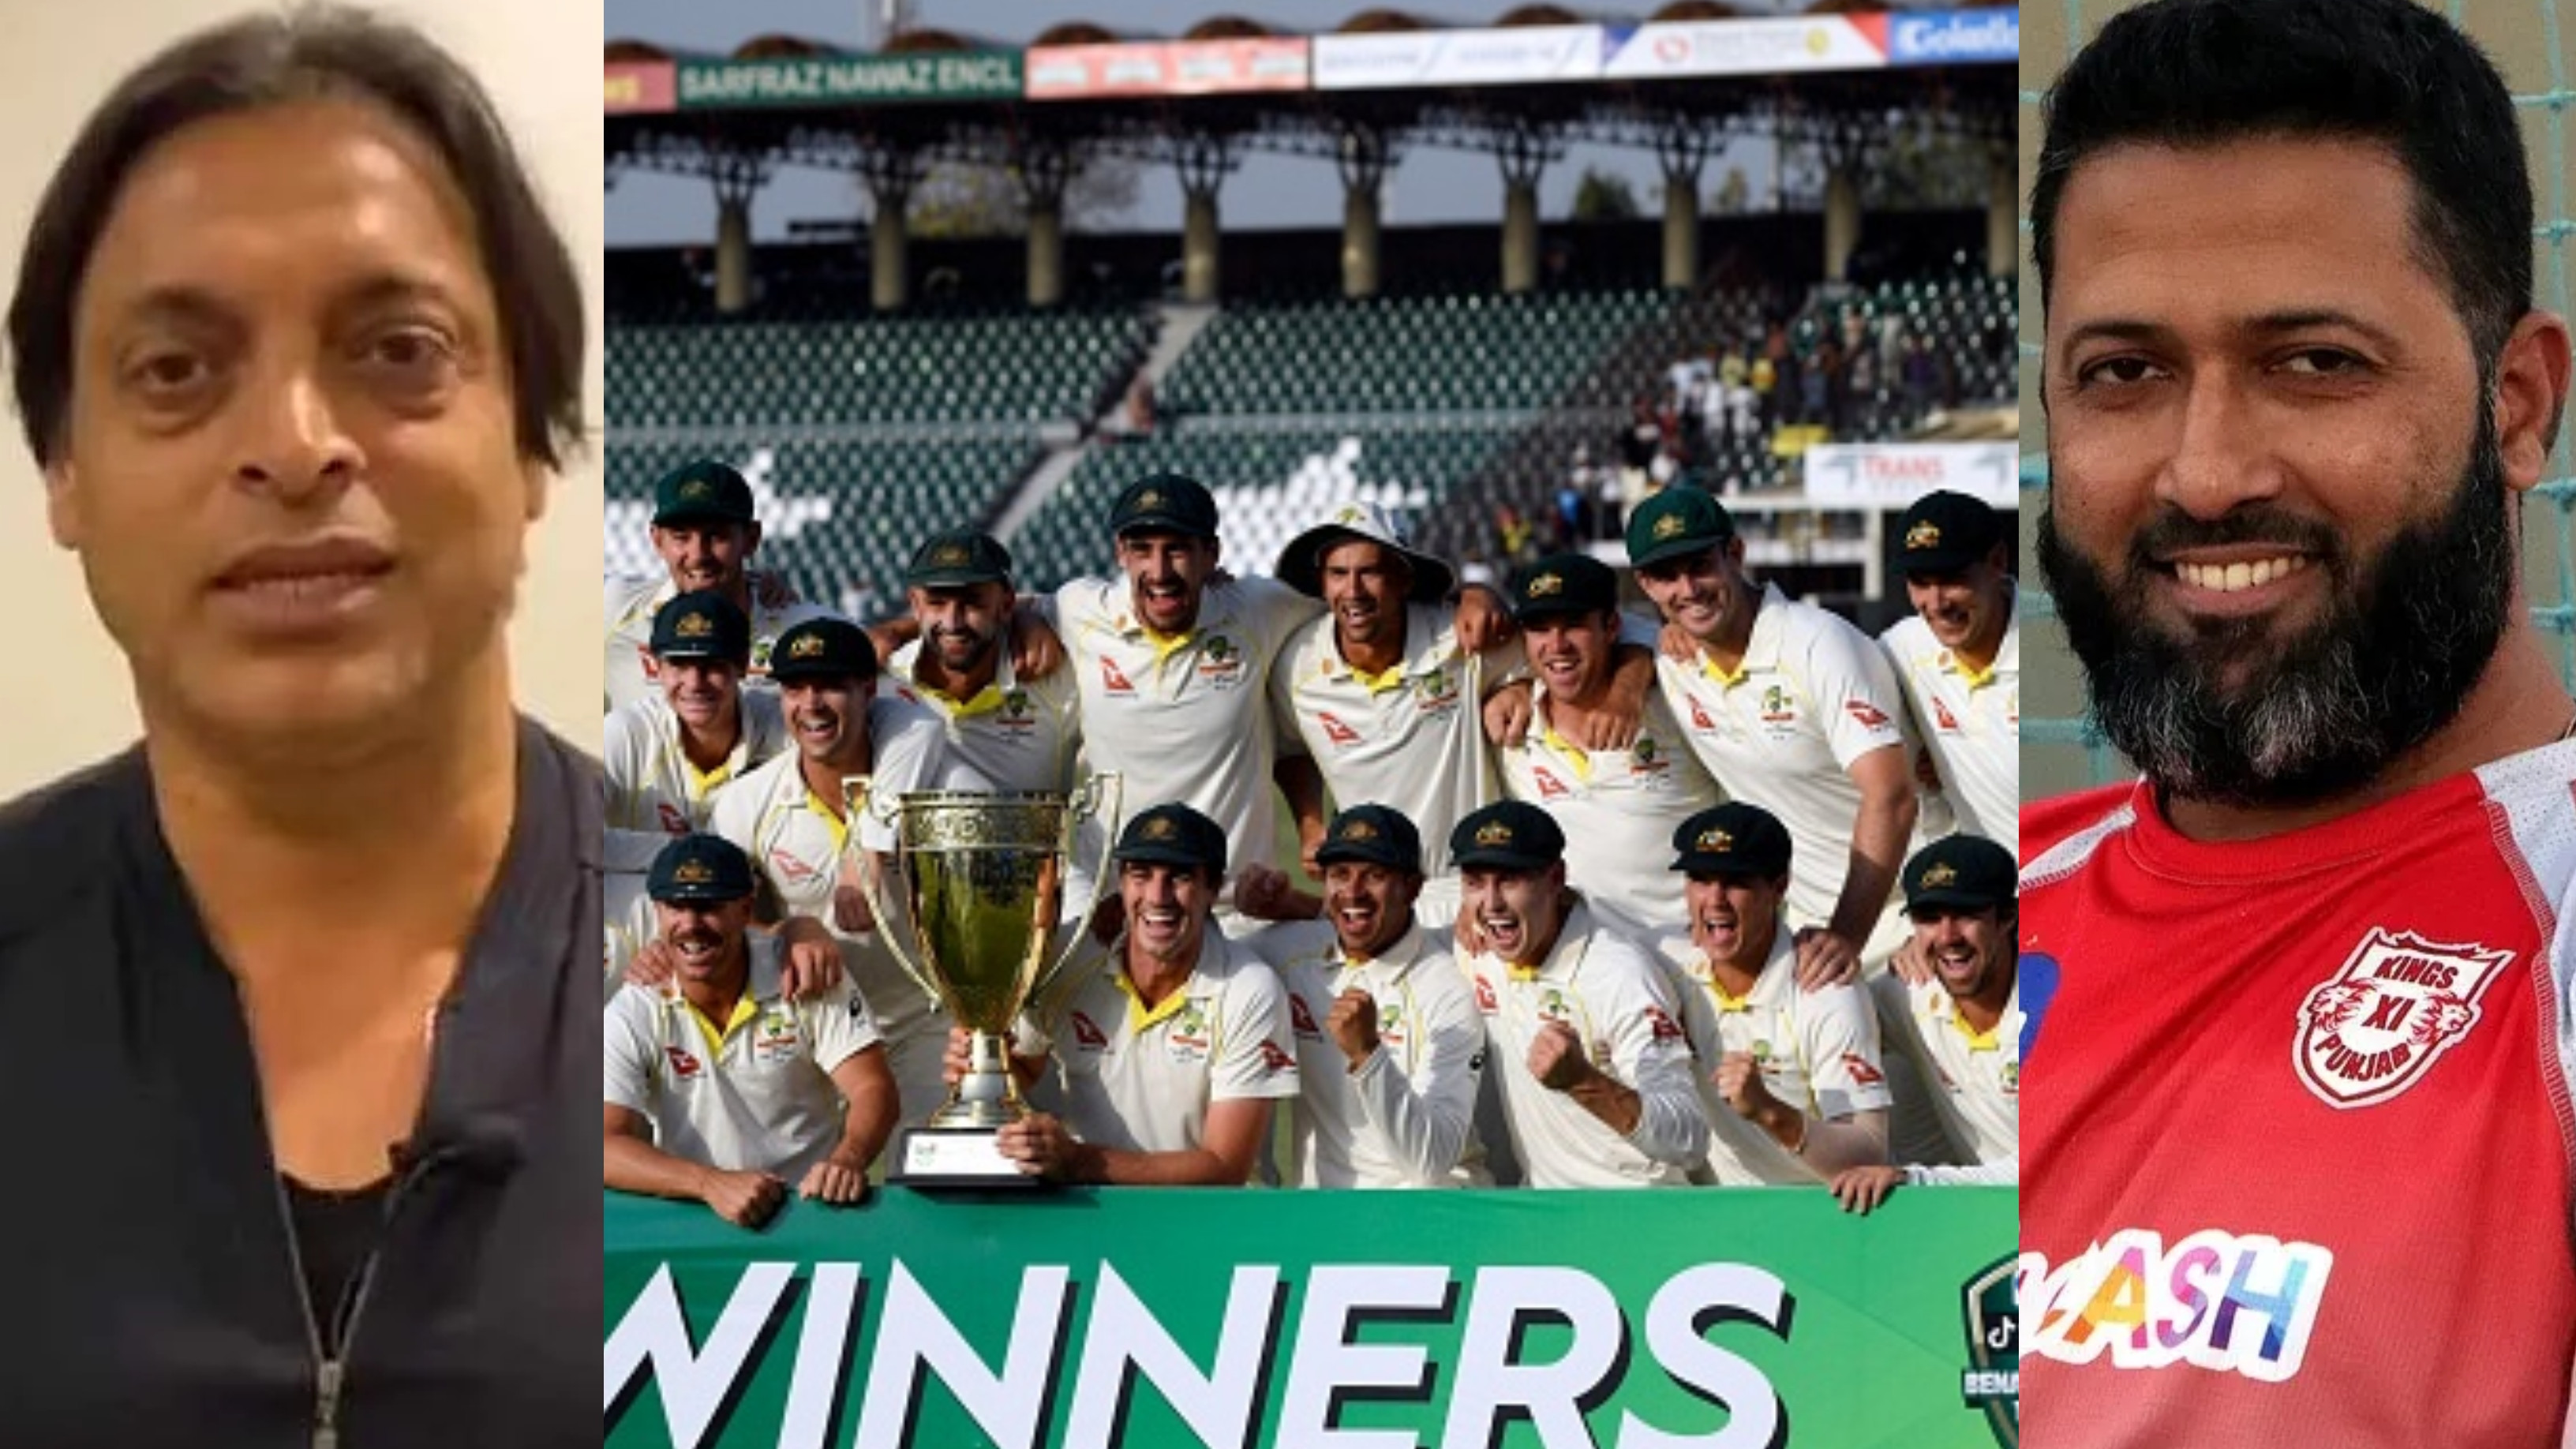 PAK v AUS 2022: Cricket fraternity reacts to Australia’s historic series victory over Pakistan with Lahore Test win